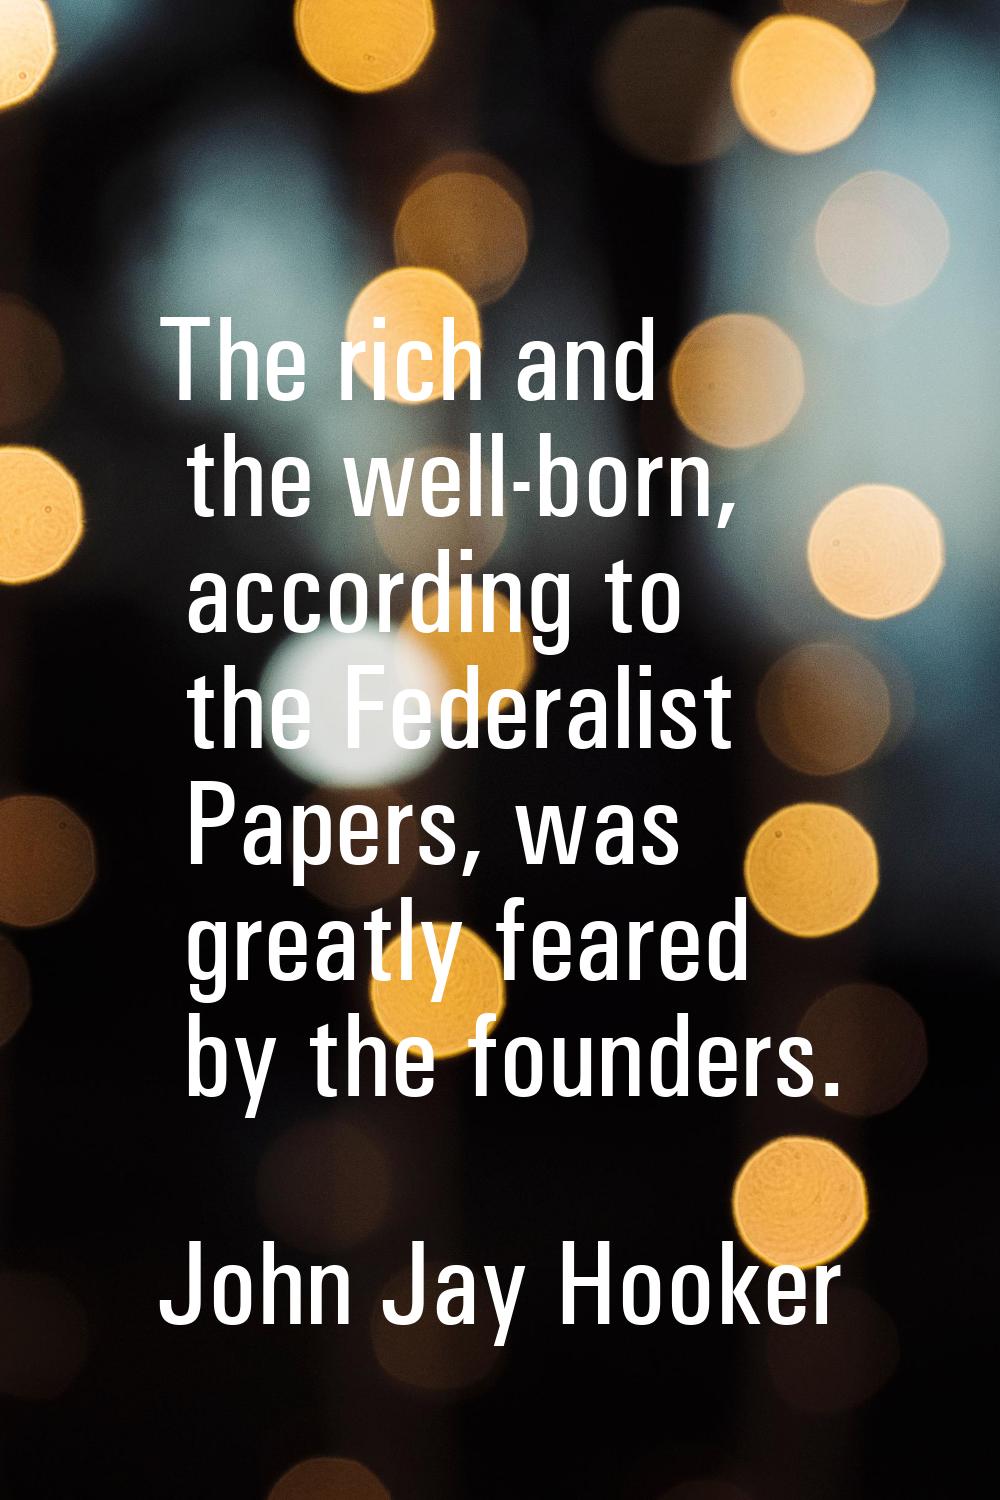 The rich and the well-born, according to the Federalist Papers, was greatly feared by the founders.